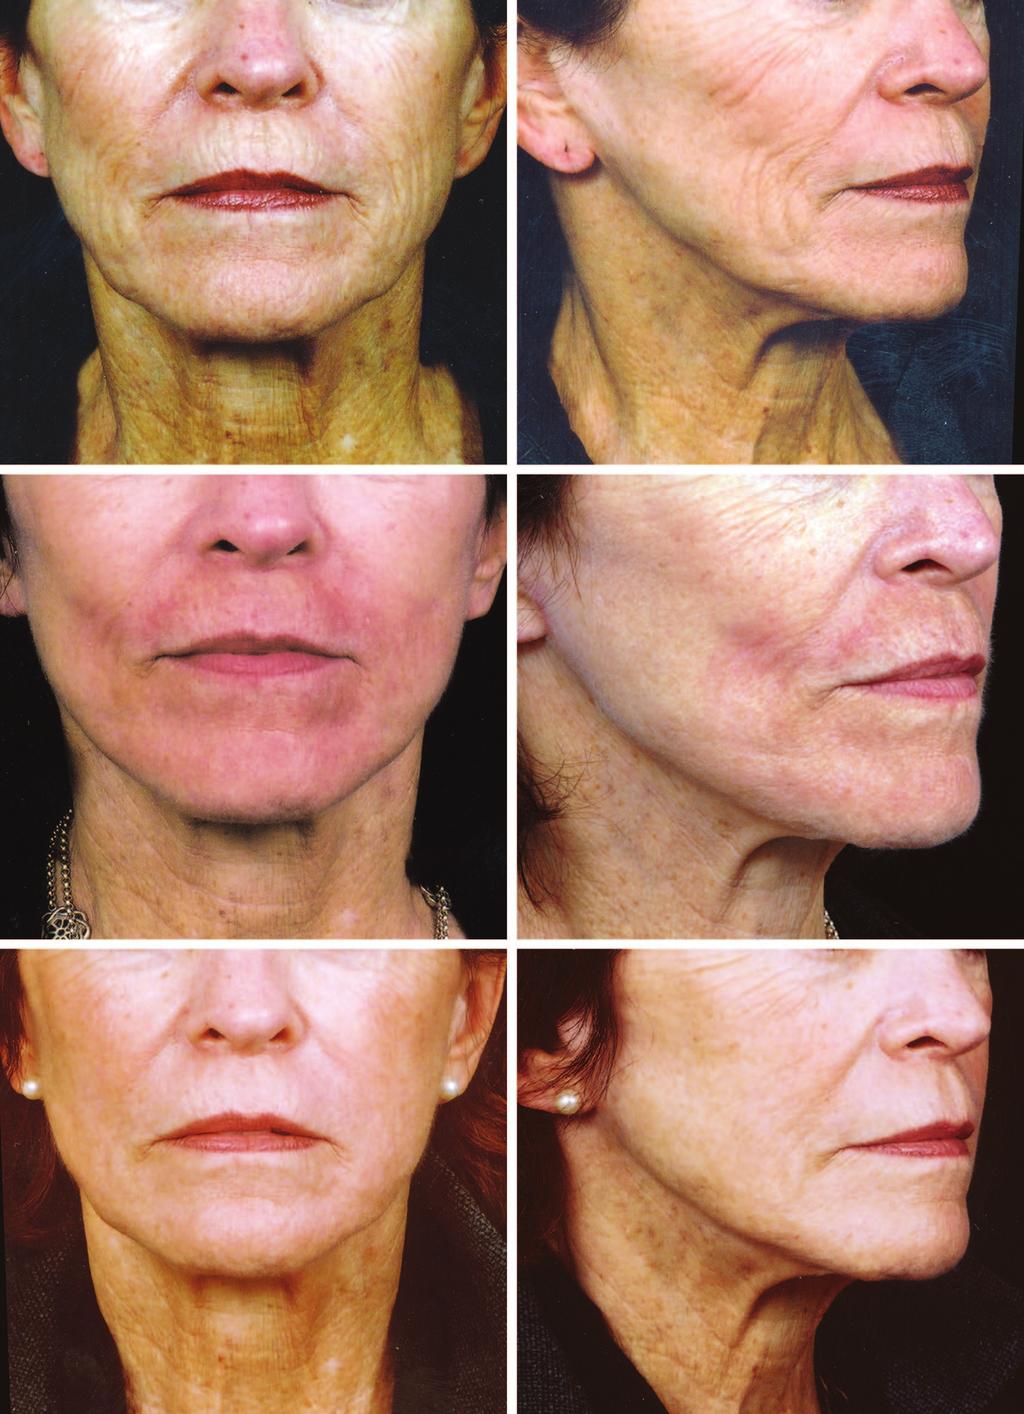 Volume 122, Number 5 Cross-Cheek Depression Fig. 3. A 67-year-old woman before secondary anterior face lift and dermabrasion (above).